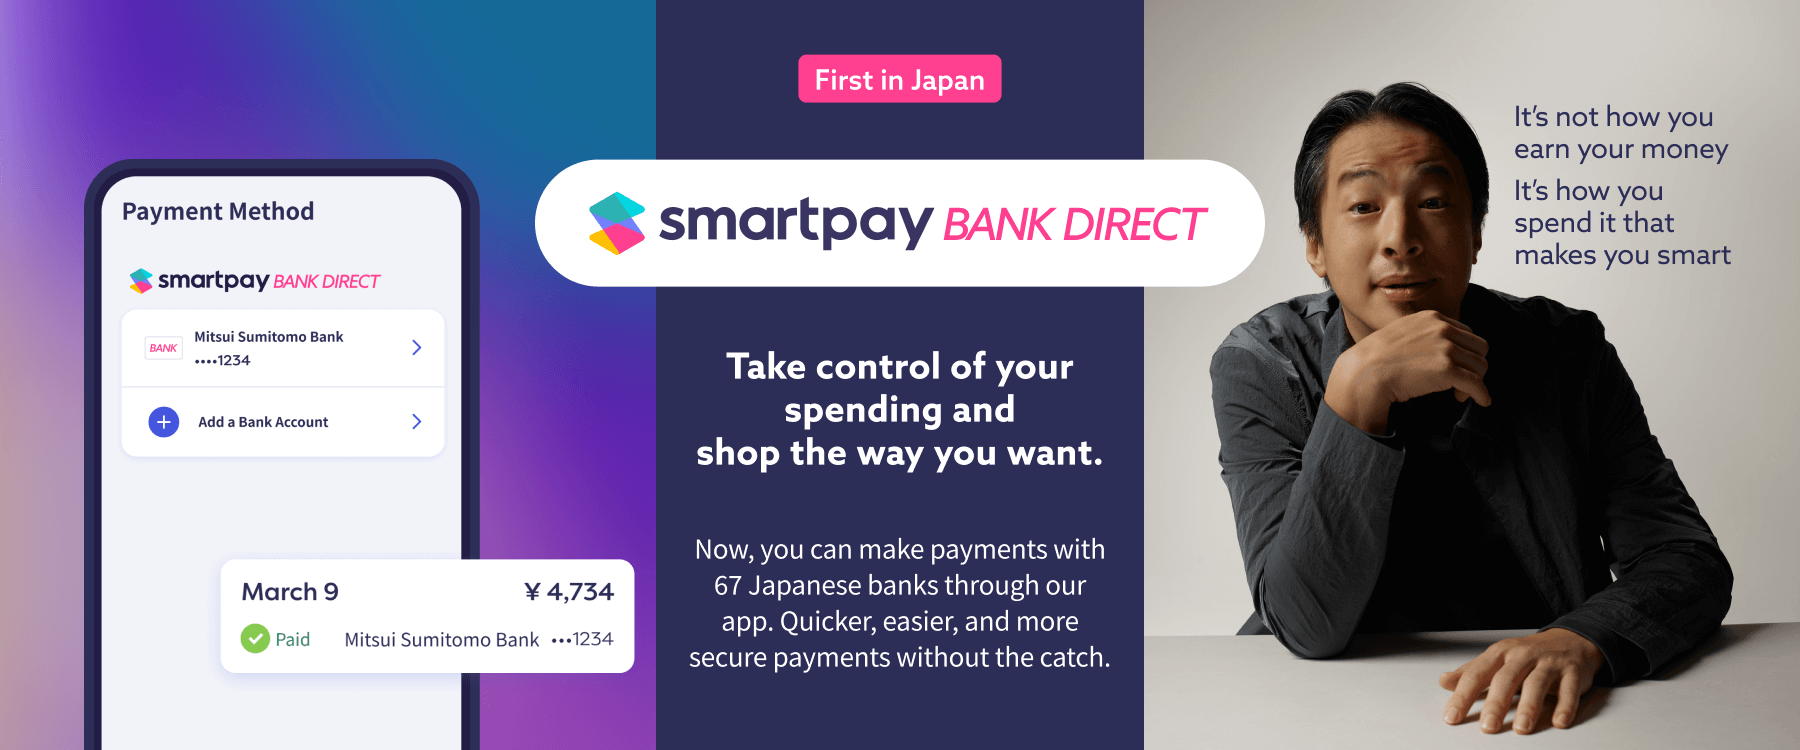 Smartpay announces “Smartpay Bank Direct,” a BNPL service that enables paying directly from the bank account with 67 banks